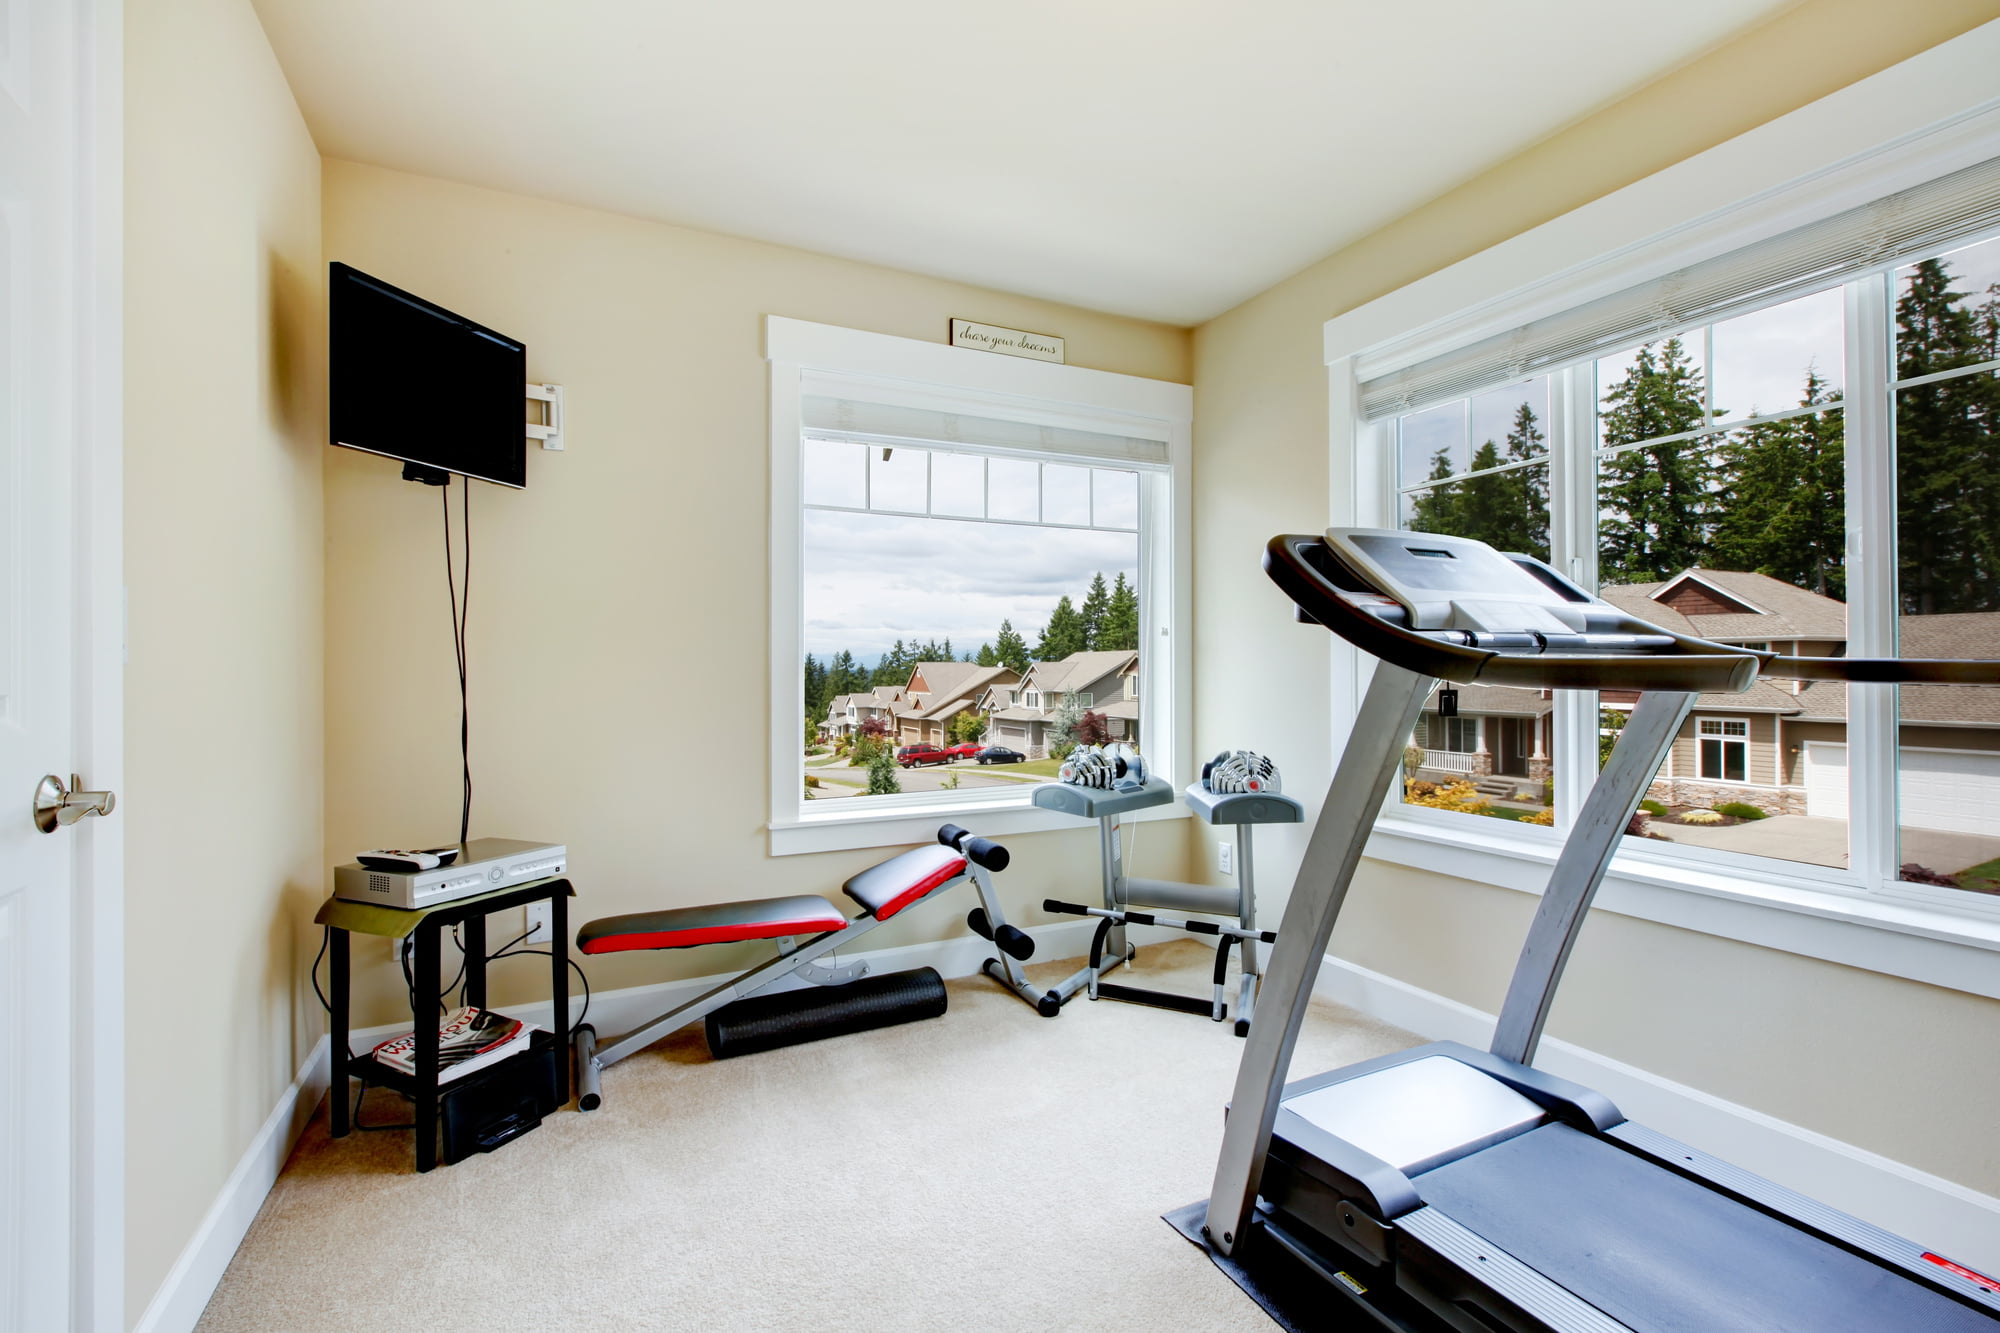 Are you wanting to get fit and stay in shape? A home gym is the answer. Check out our tips about creating a home gym that you'll enjoy and actually use today.